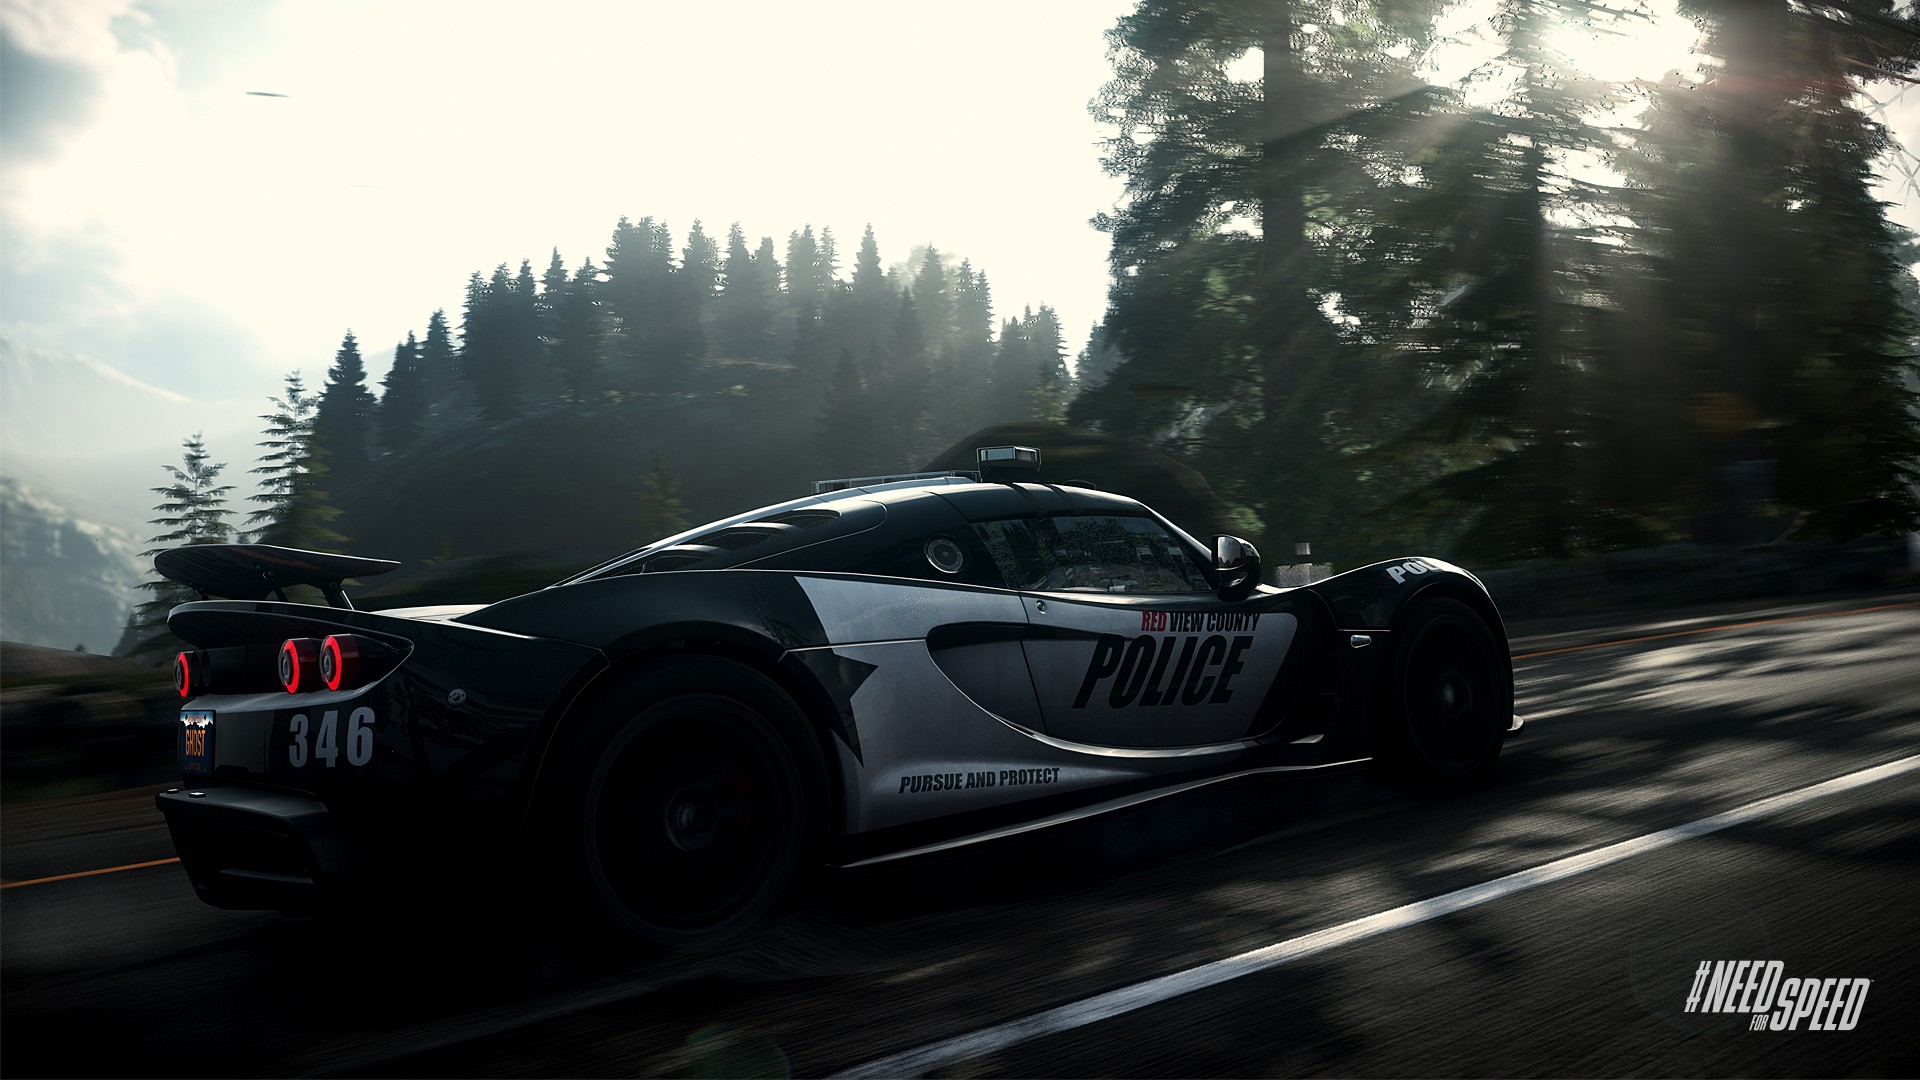 Car Need For Speed Police Cars Trees Road Tail Light Motion Blur Rear Wing 1920x1080